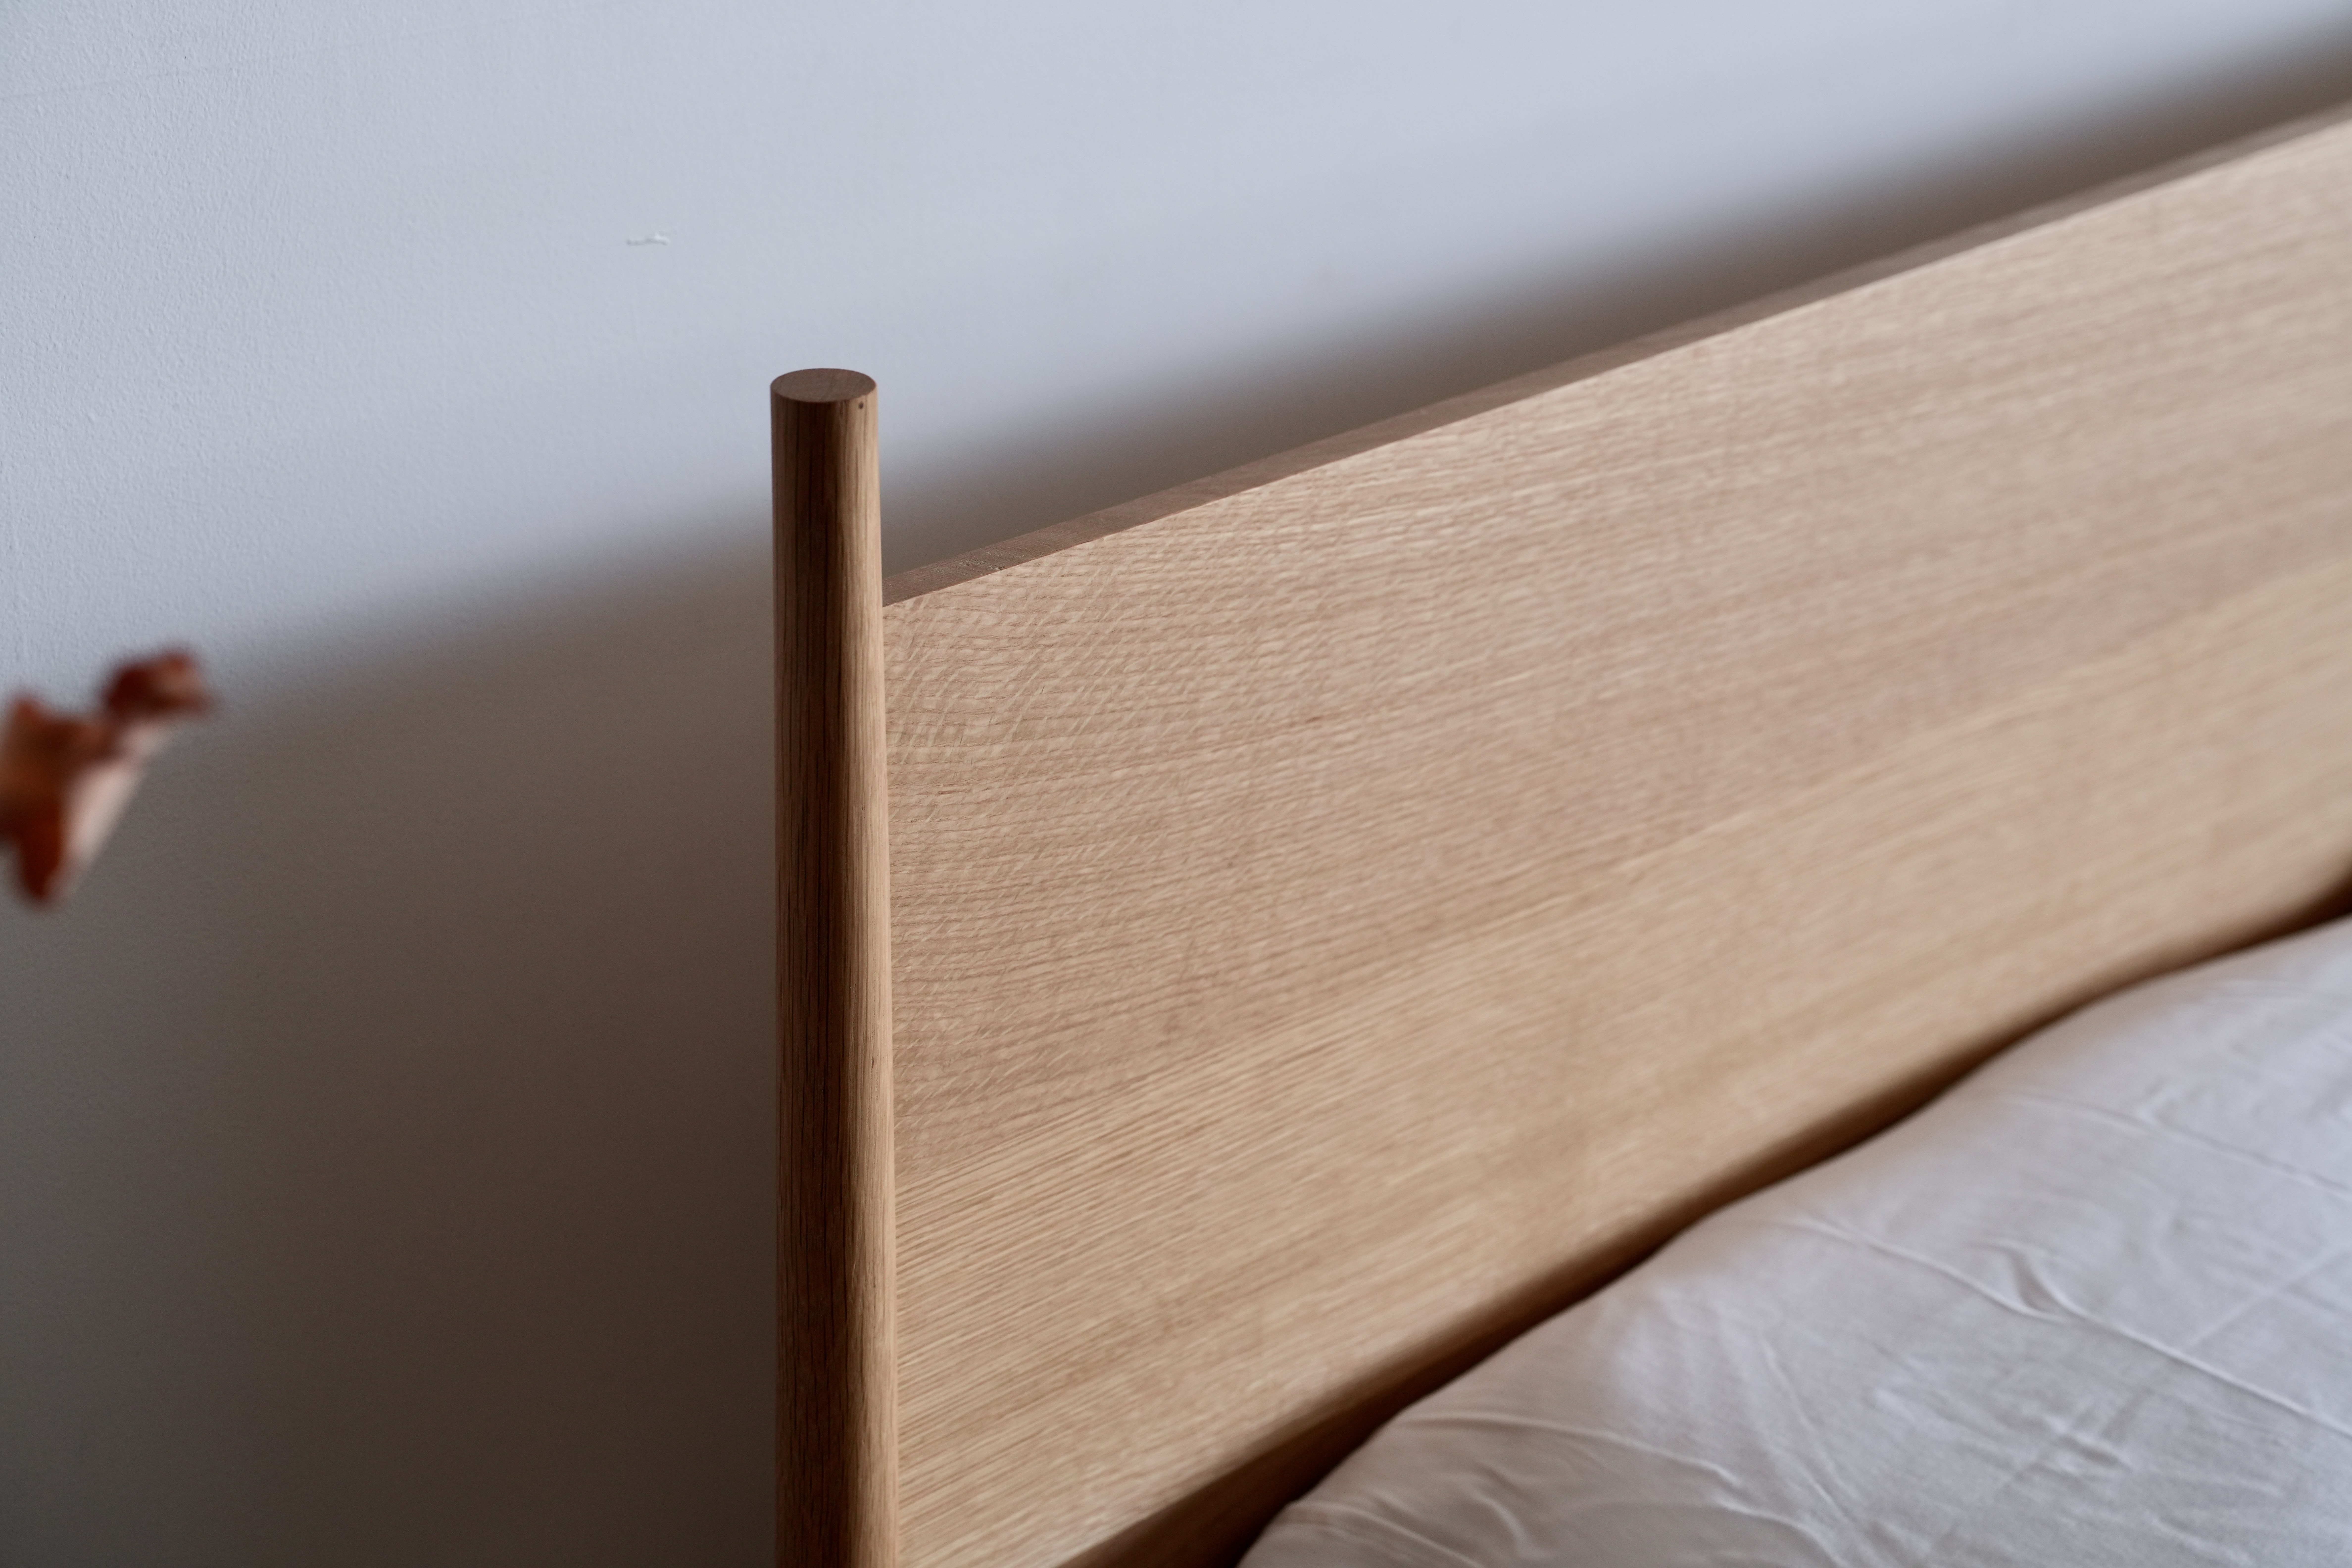 Close-up of a white oak headboard with a turned upright post that extends above the headboard.